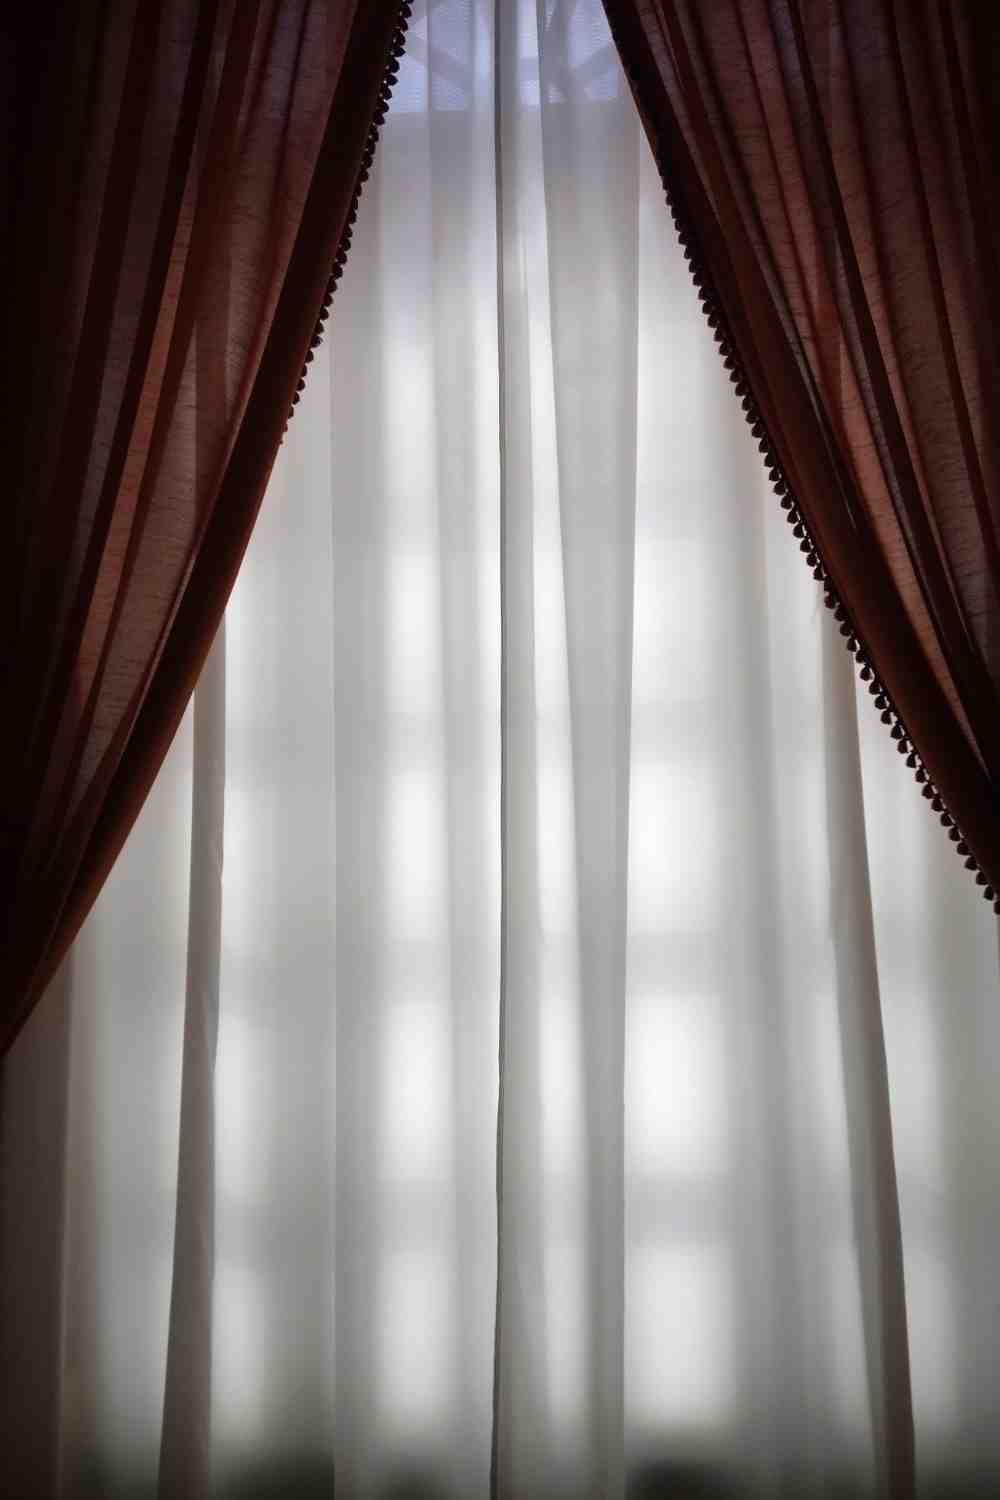 Closing the curtains